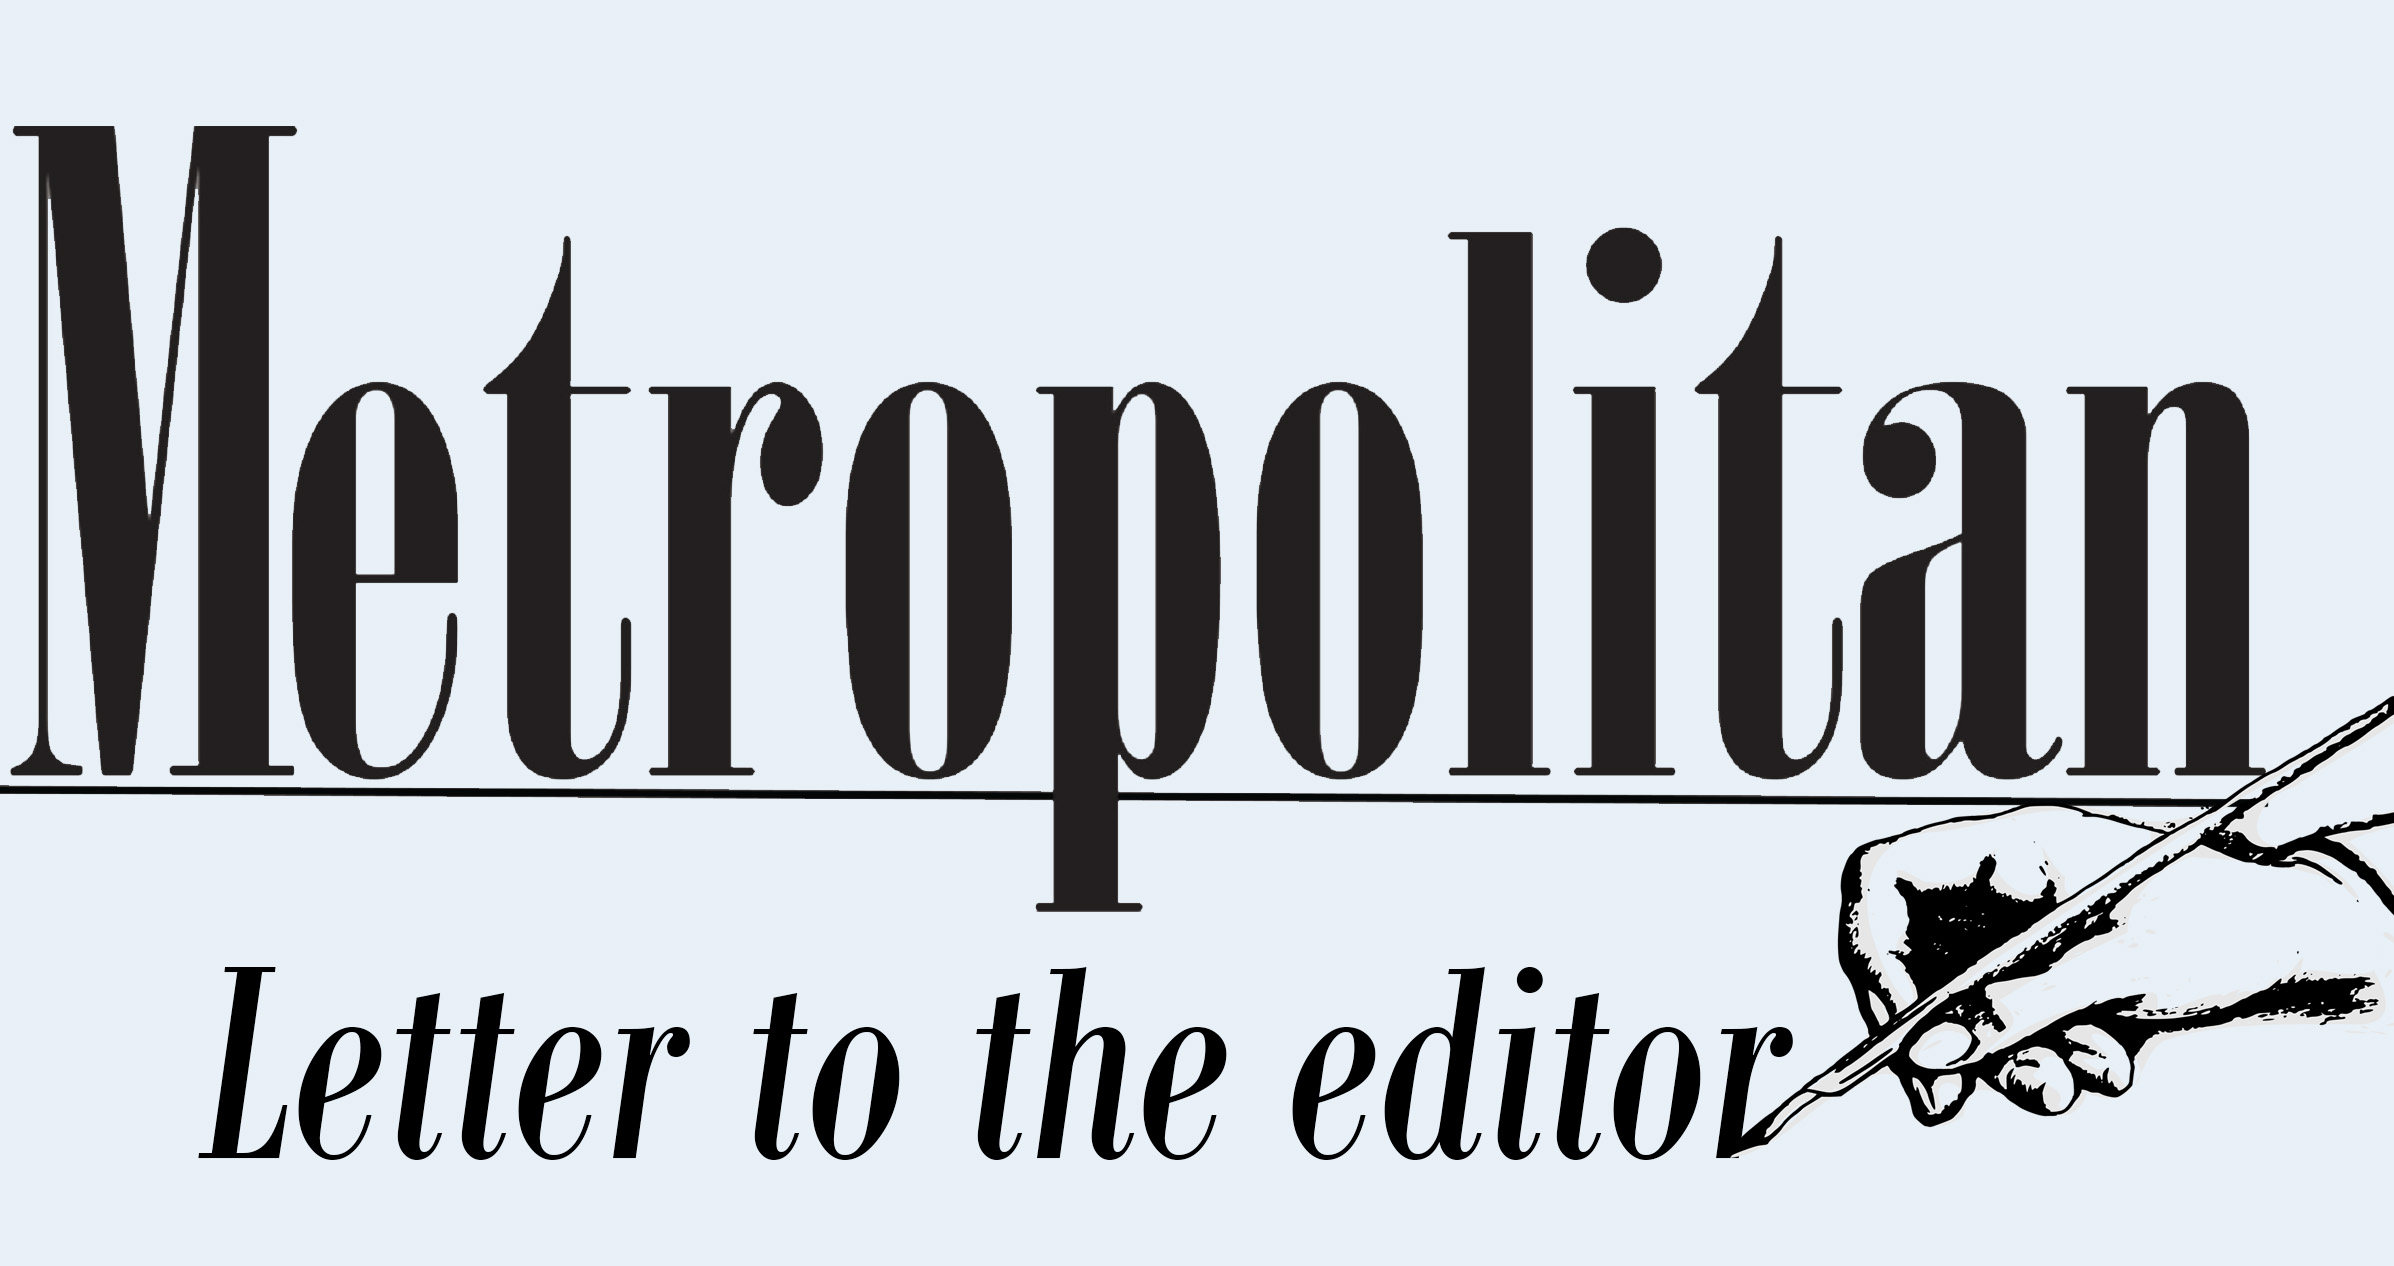 Letter to the editor: Let the third parties participate